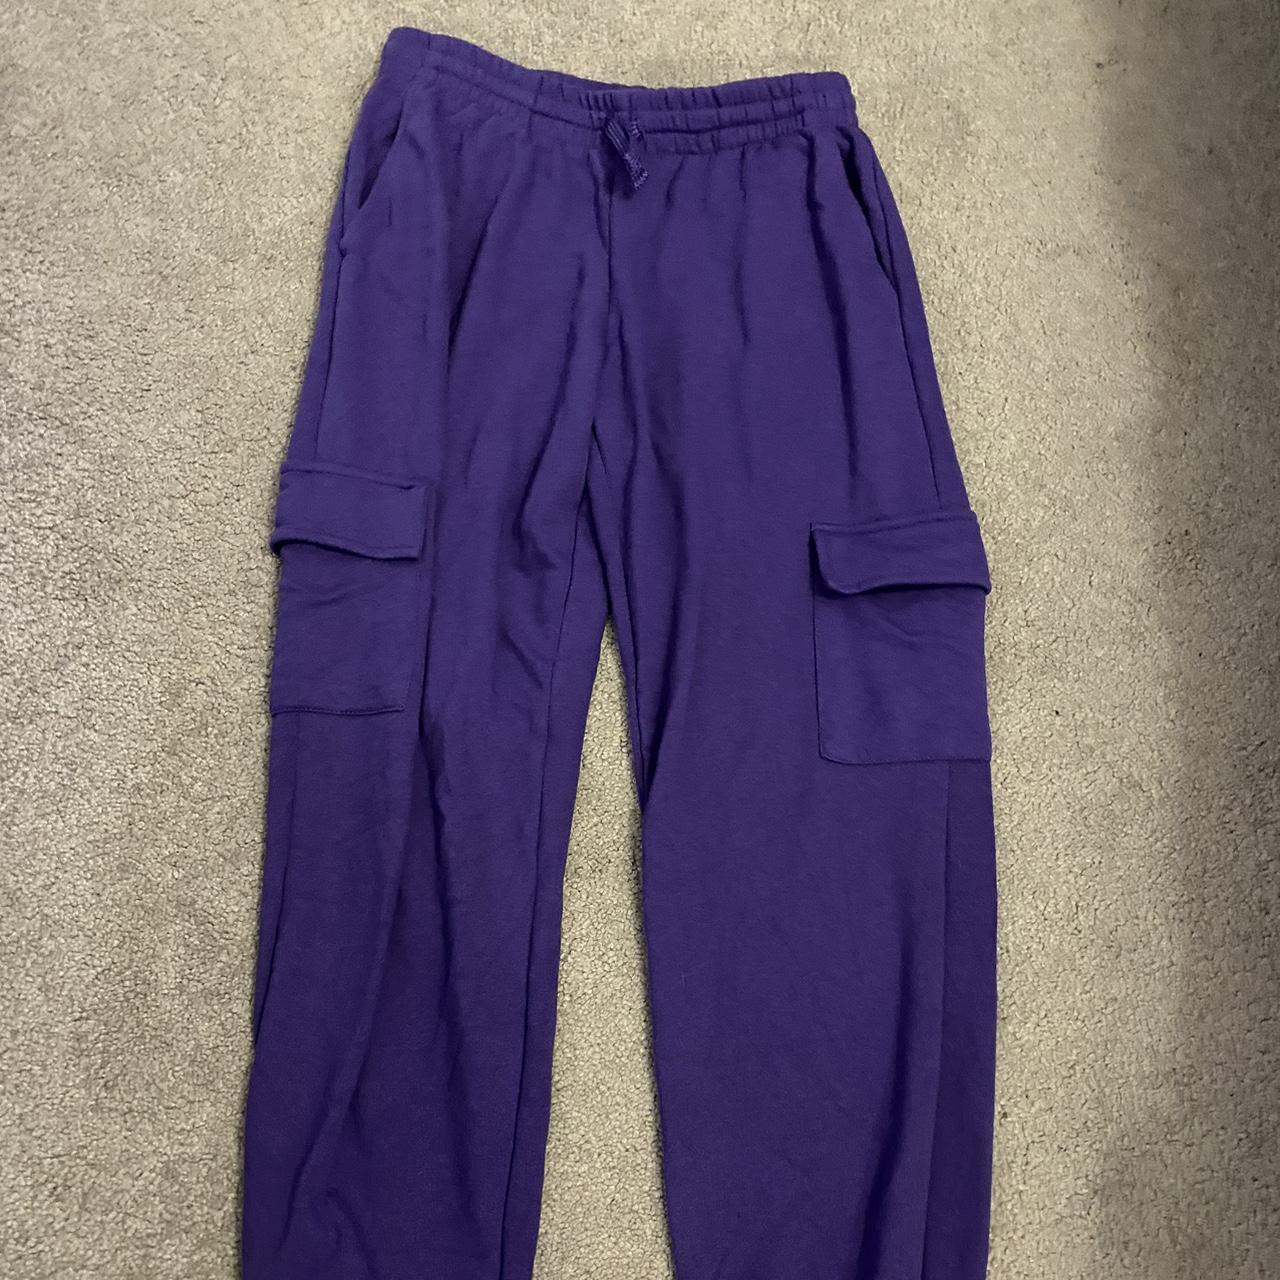 Purple jogger cargos, in excellent condition size... - Depop